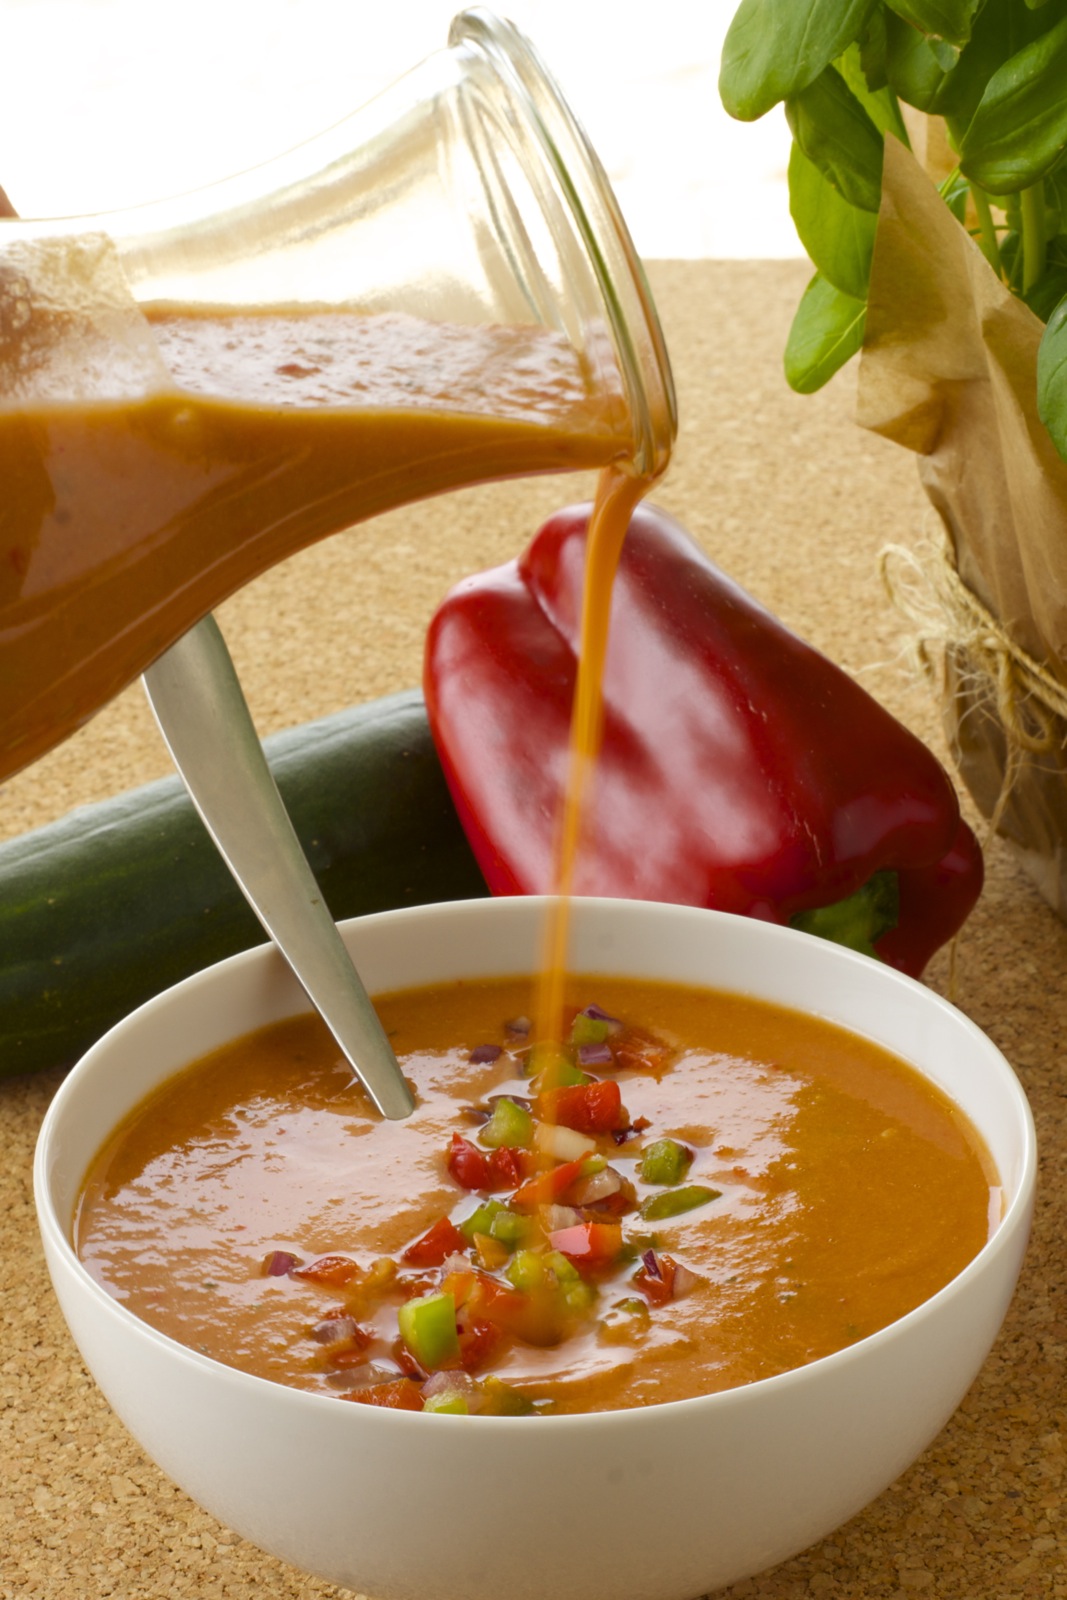 Pouring a bowl of Gazpacho